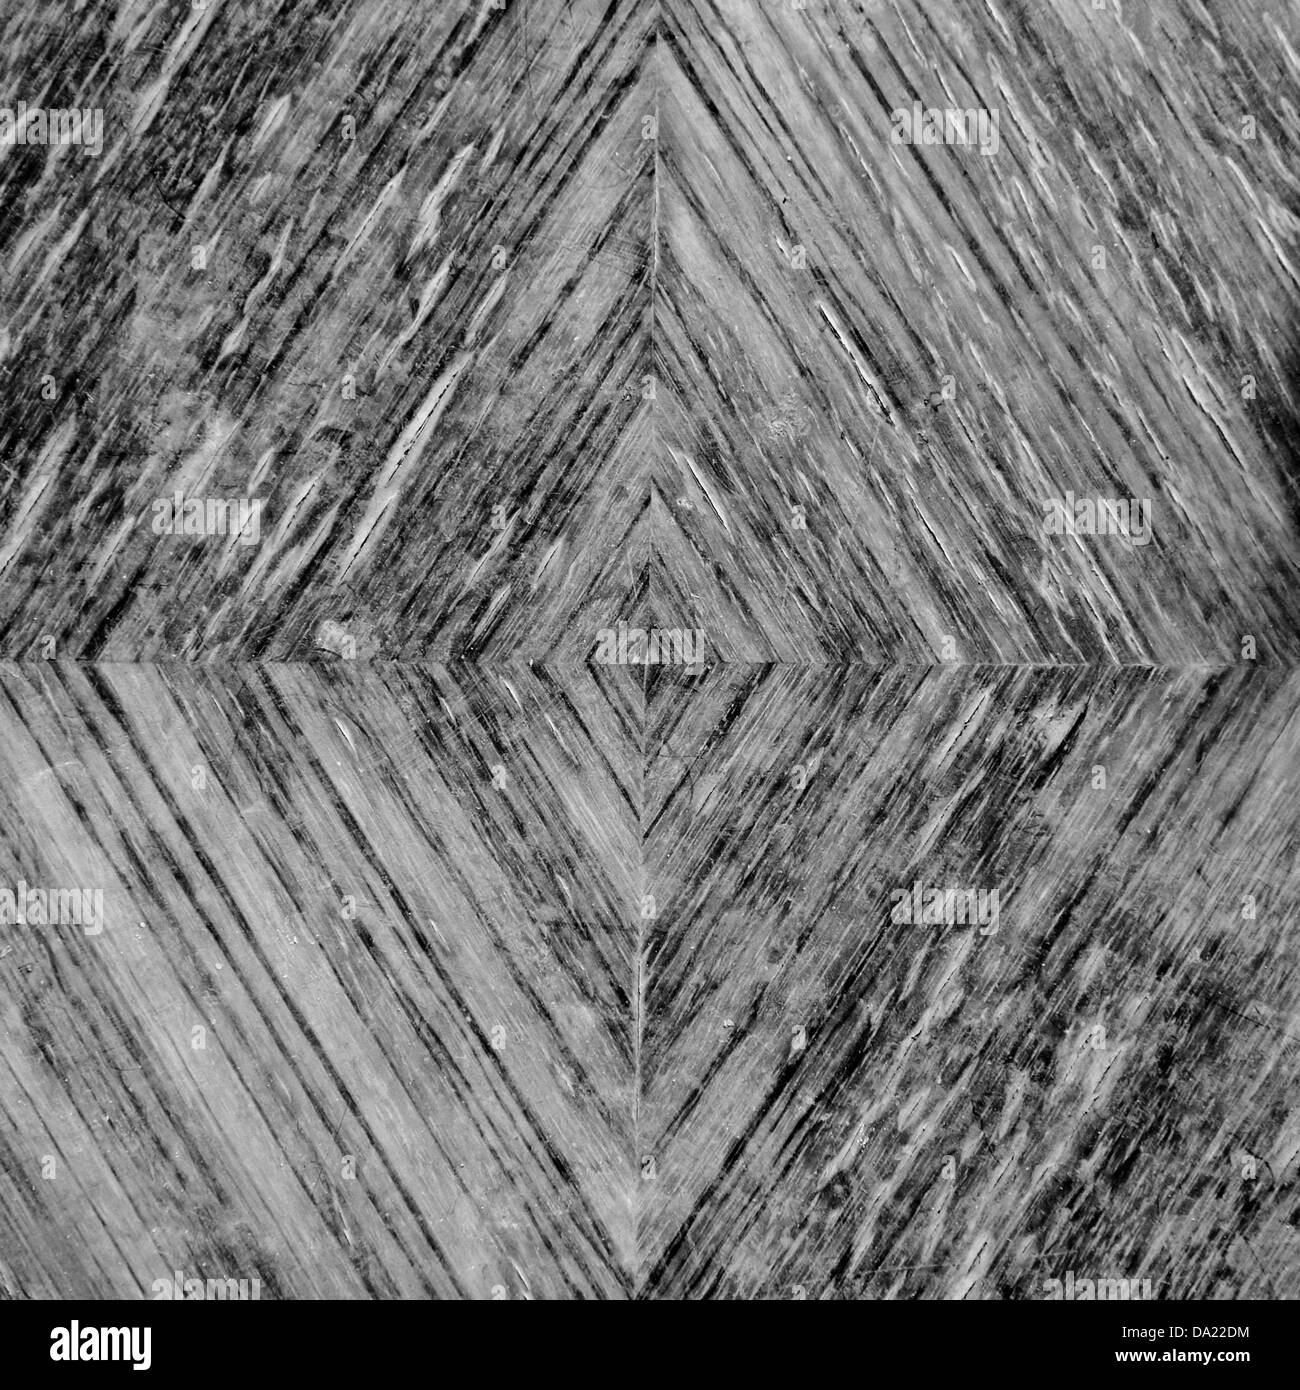 Wood grunge background with growth rings pattern. Black and white. Stock Photo